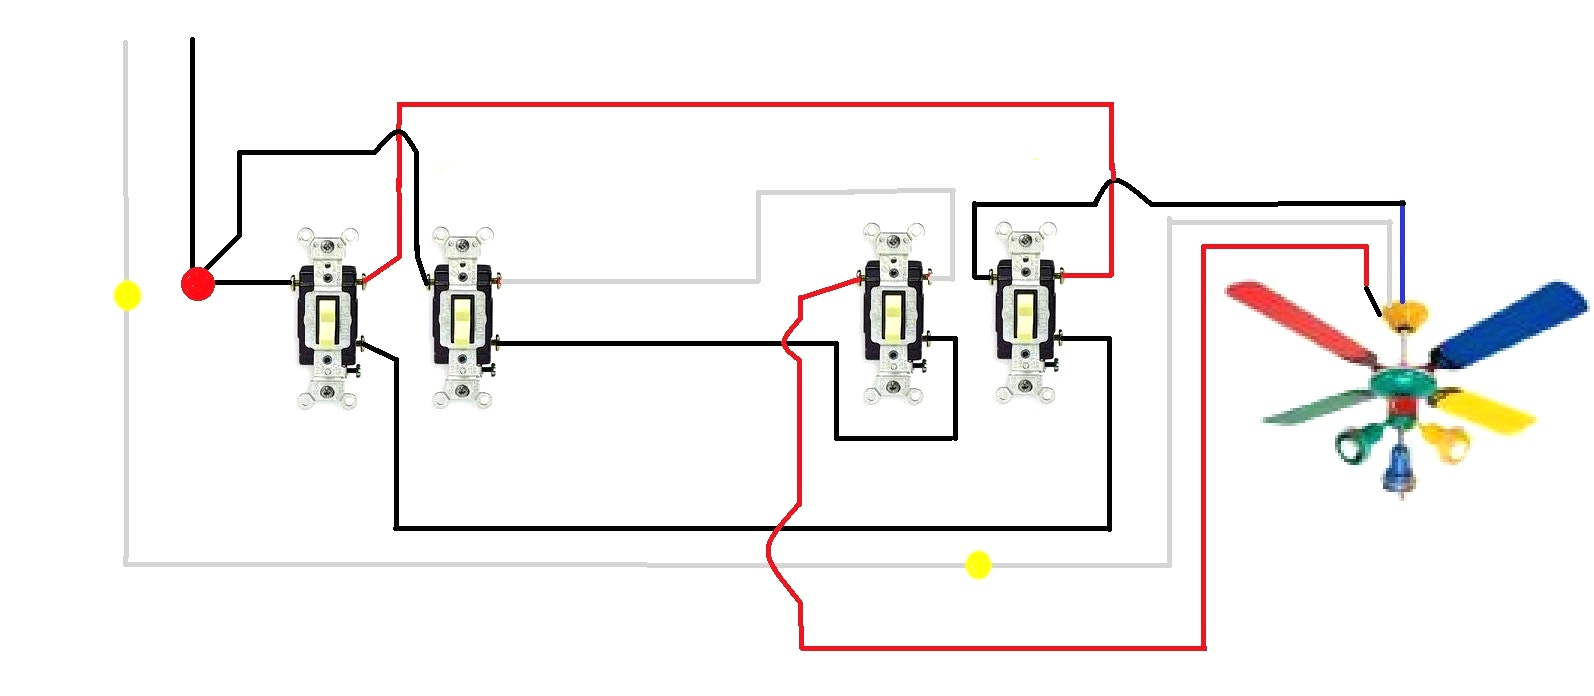 Wiring Diagram For Ceiling Fan With Wall Switch | Wiring Library - Ceiling Fan Wall Switch Wiring Diagram